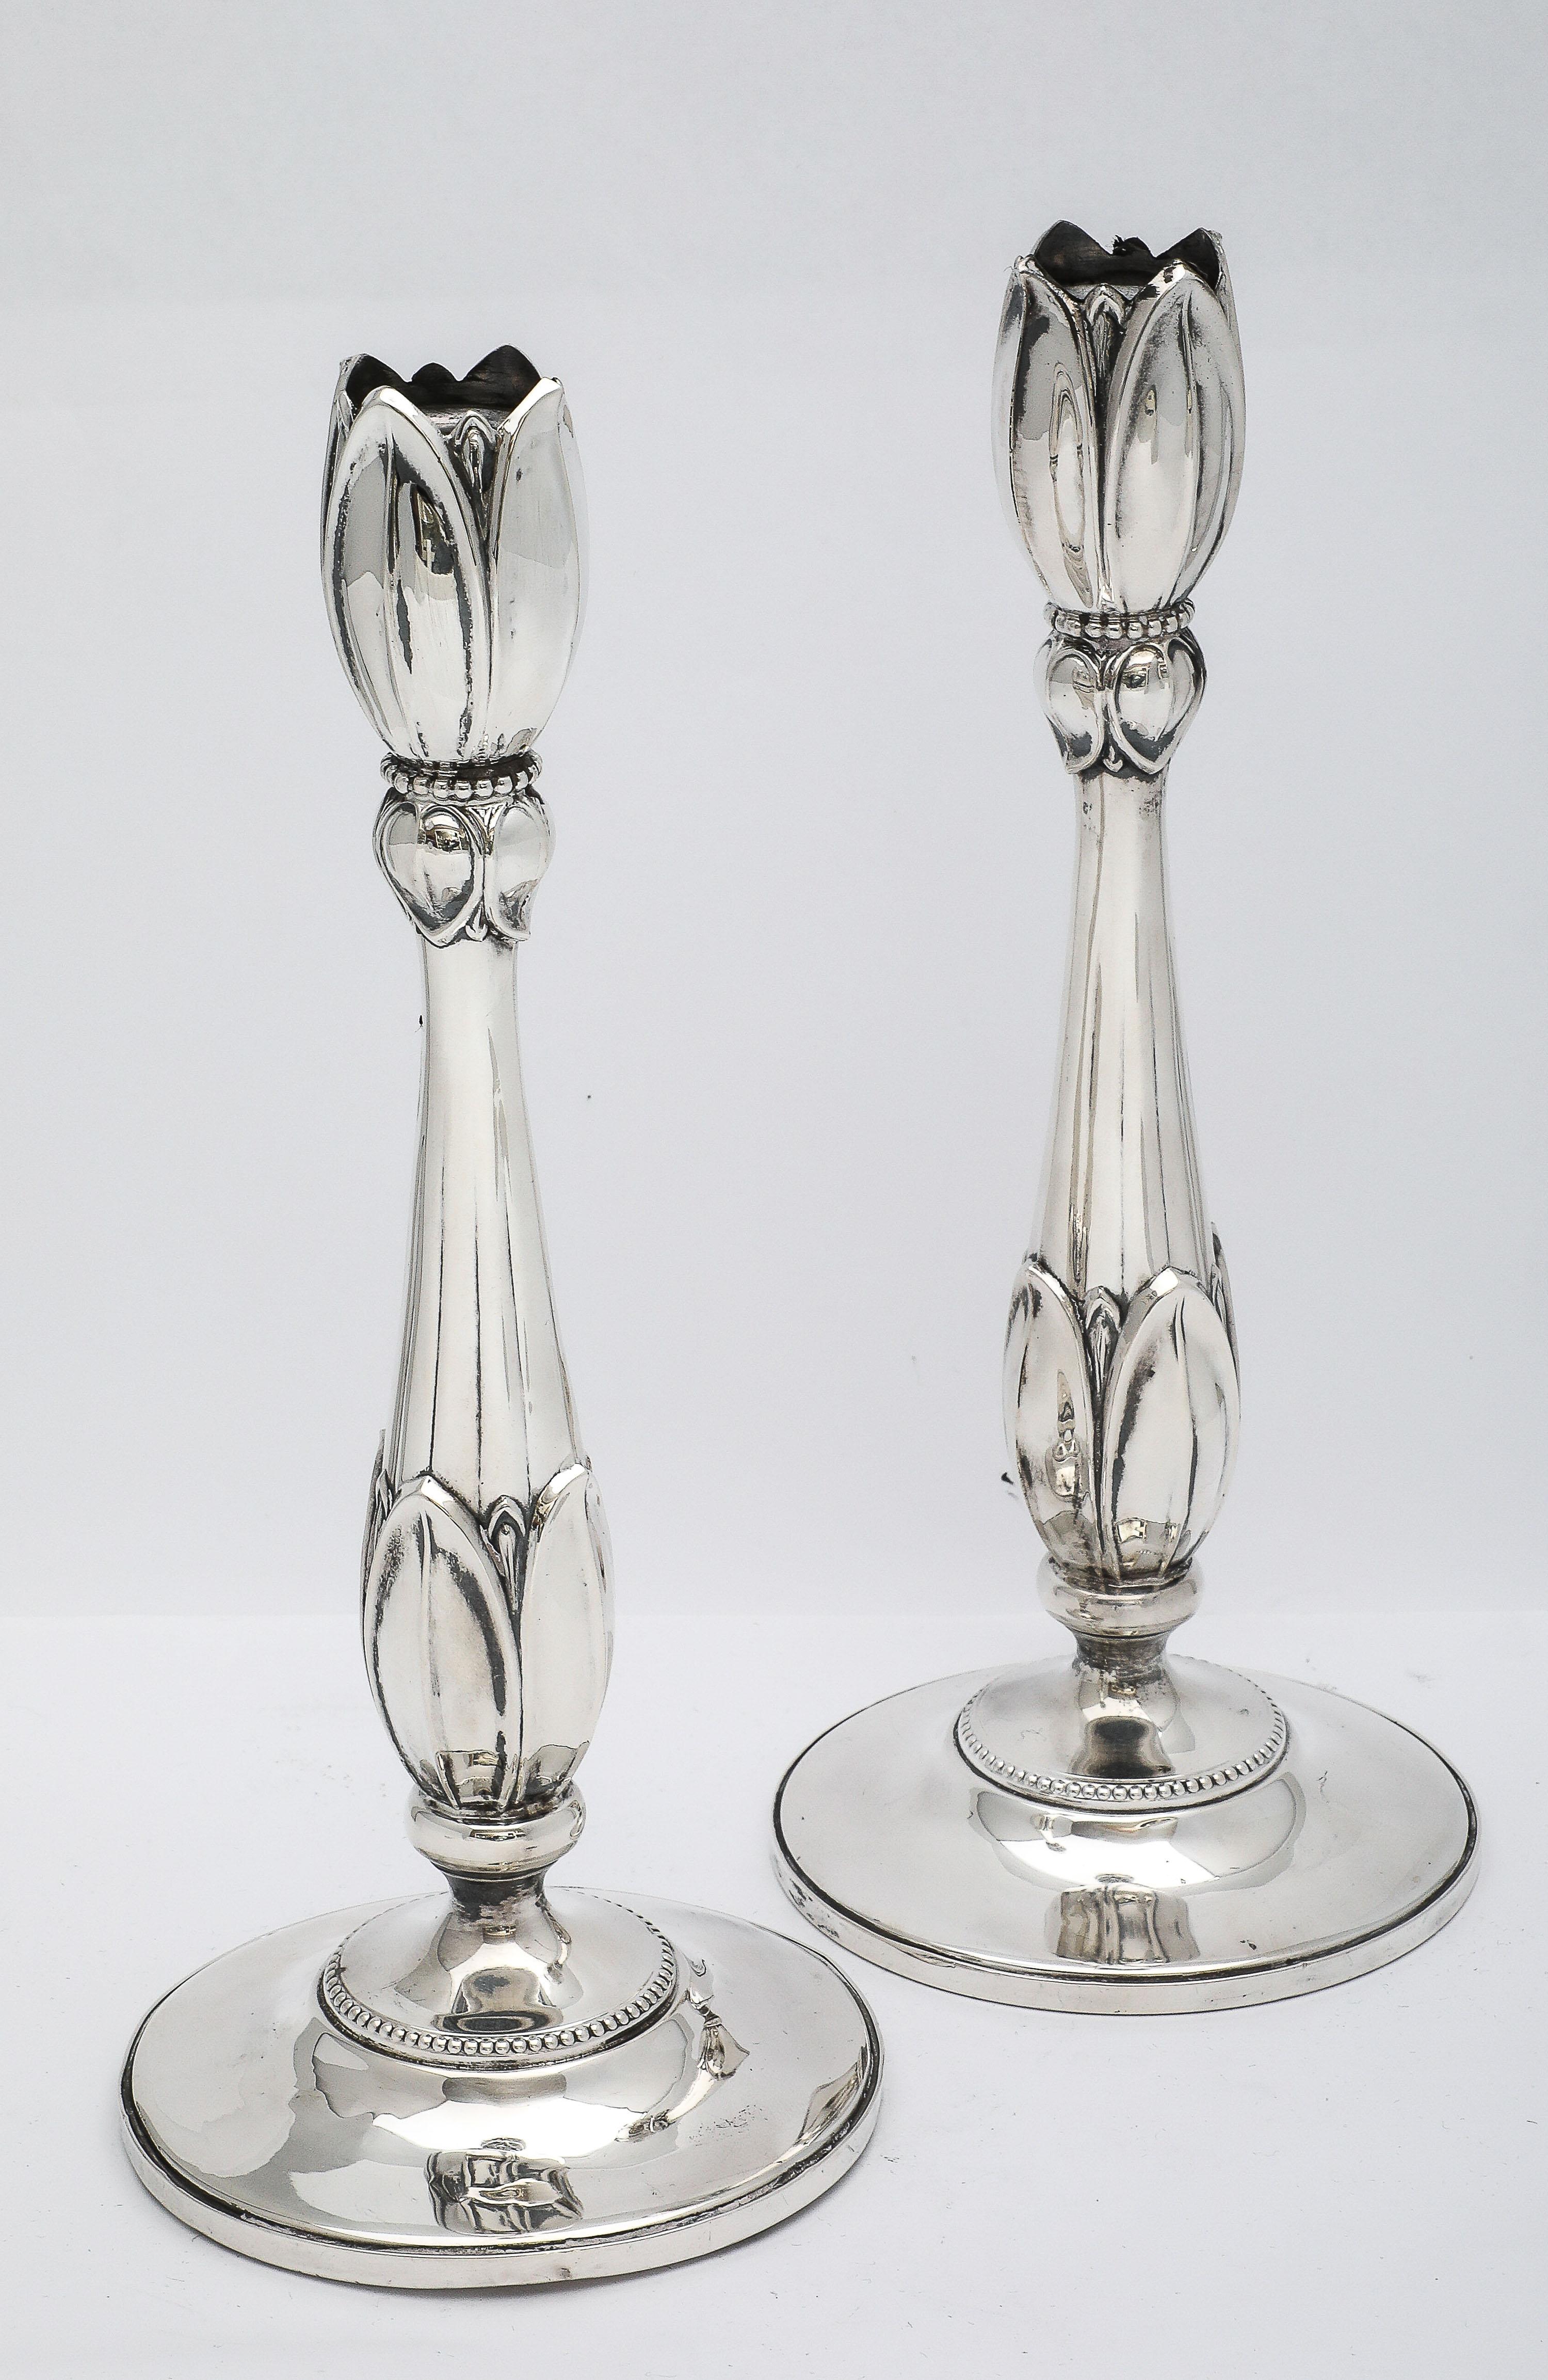 American Rare Pair of Tall Sterling Silver Art Nouveau-Style Flower-Form Candlesticks For Sale